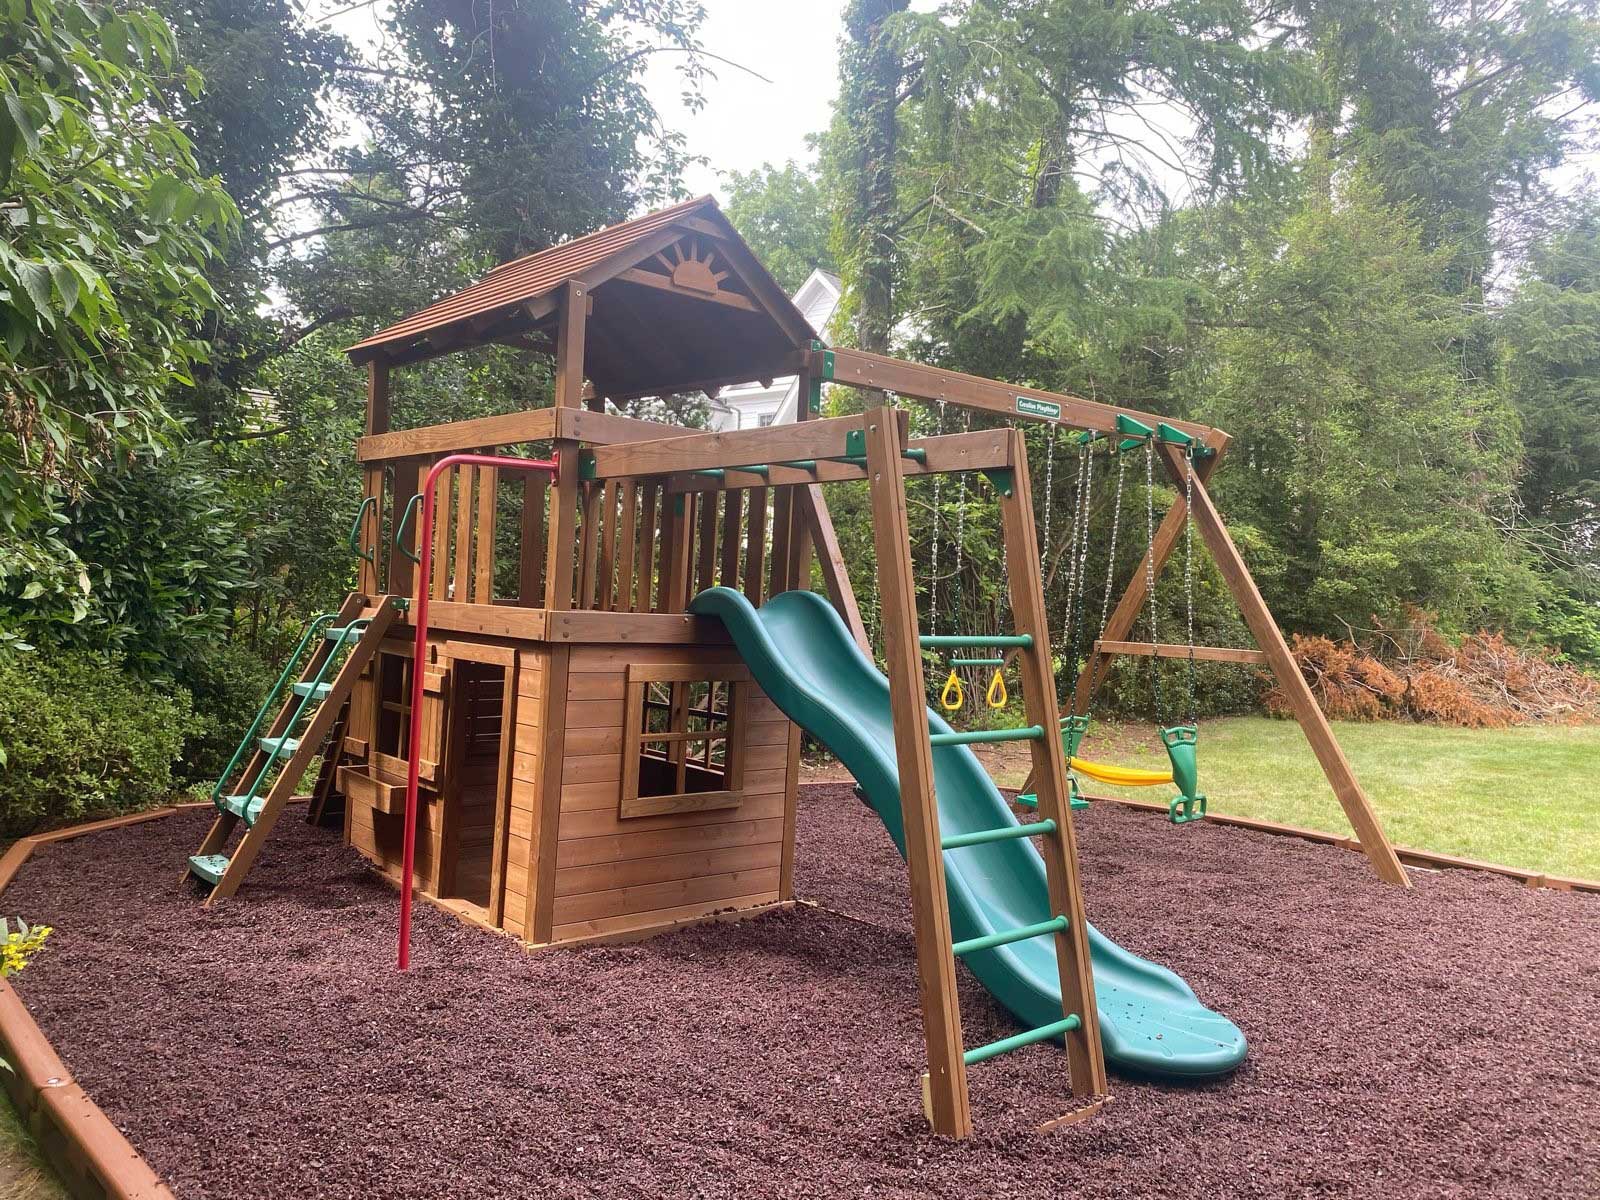 Customer photograph of a Creative Playthings Swing Set in a residential yard.